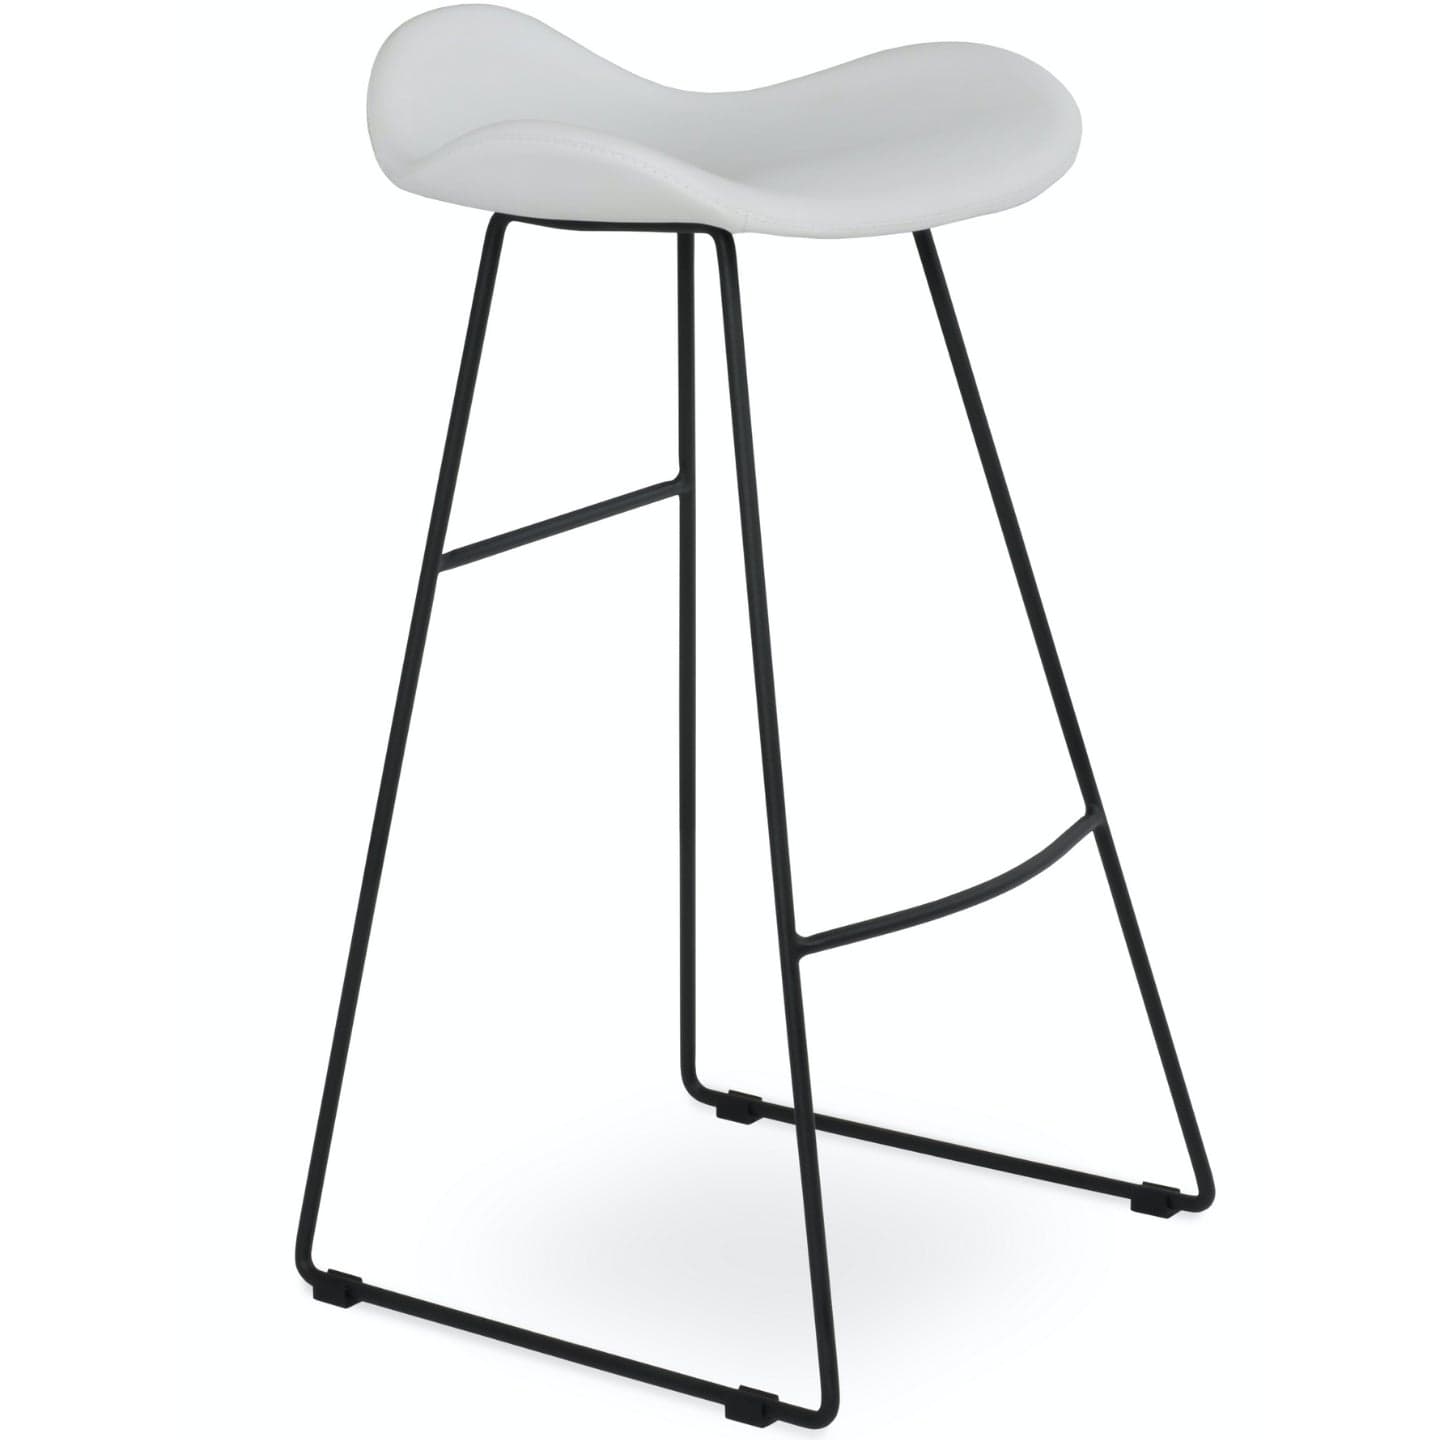 Soho Concept falcon-wire-black-metal-wire-base-faux-leather-seat-kitchen-bar-stool-in-white